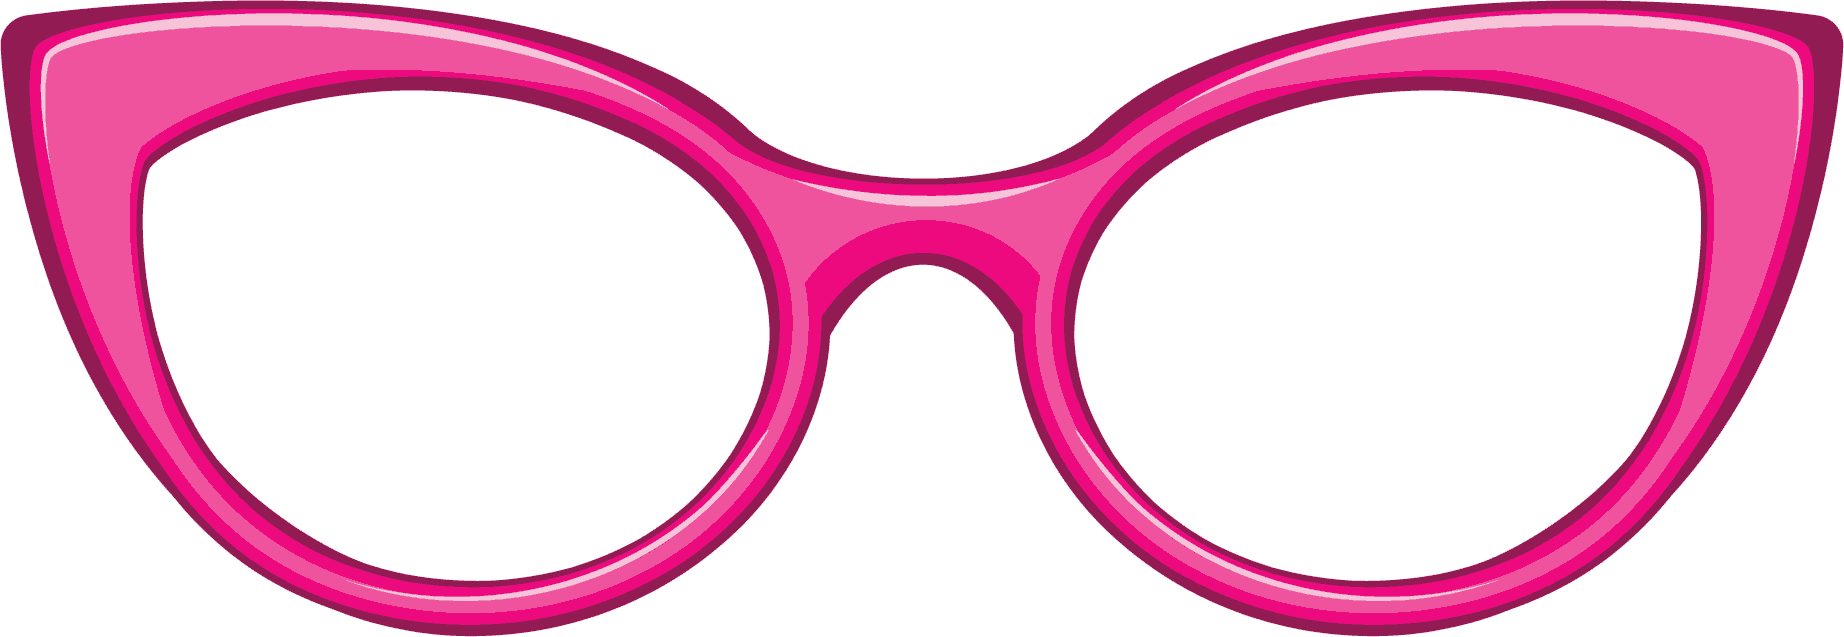 2 picture glasses. Free cliparts that you can download to you computer and use in your designs.